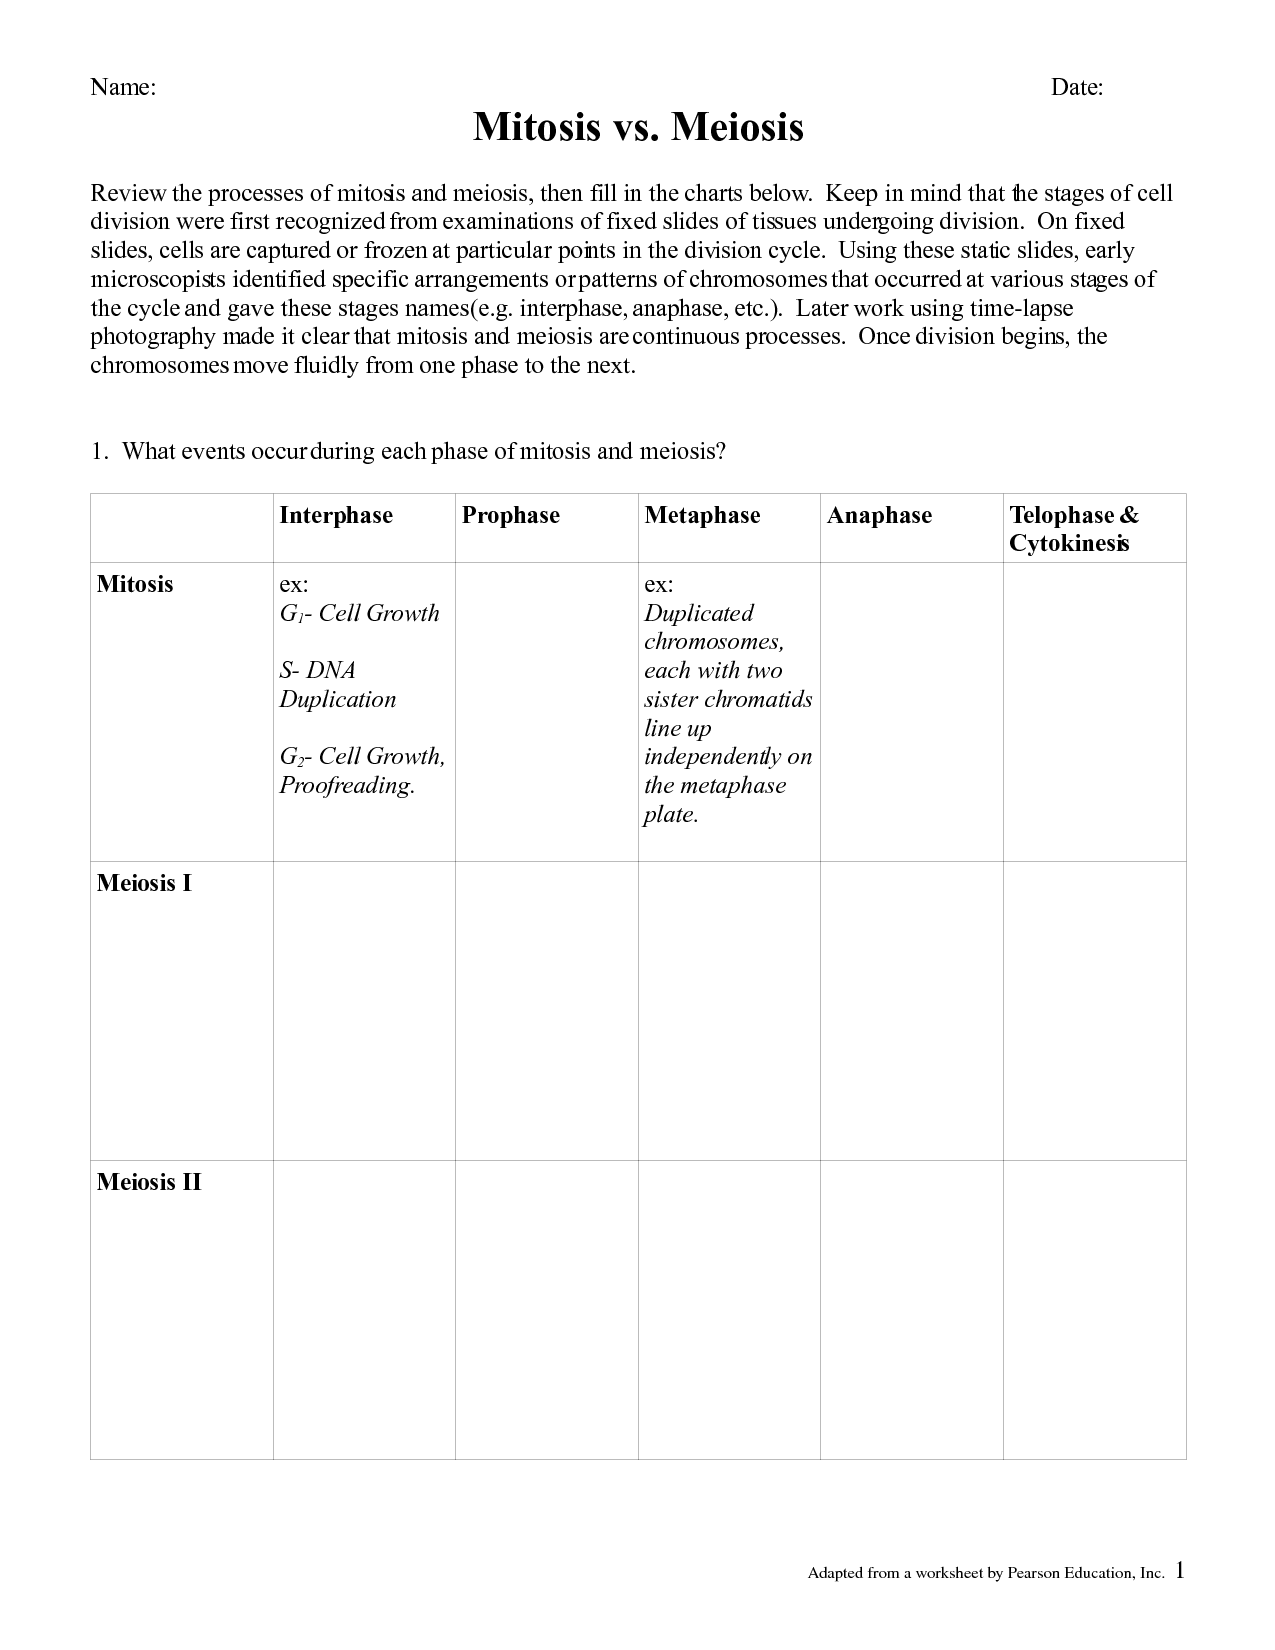 15 Best Images of Mitosis Vs Meiosis Worksheet Answers 